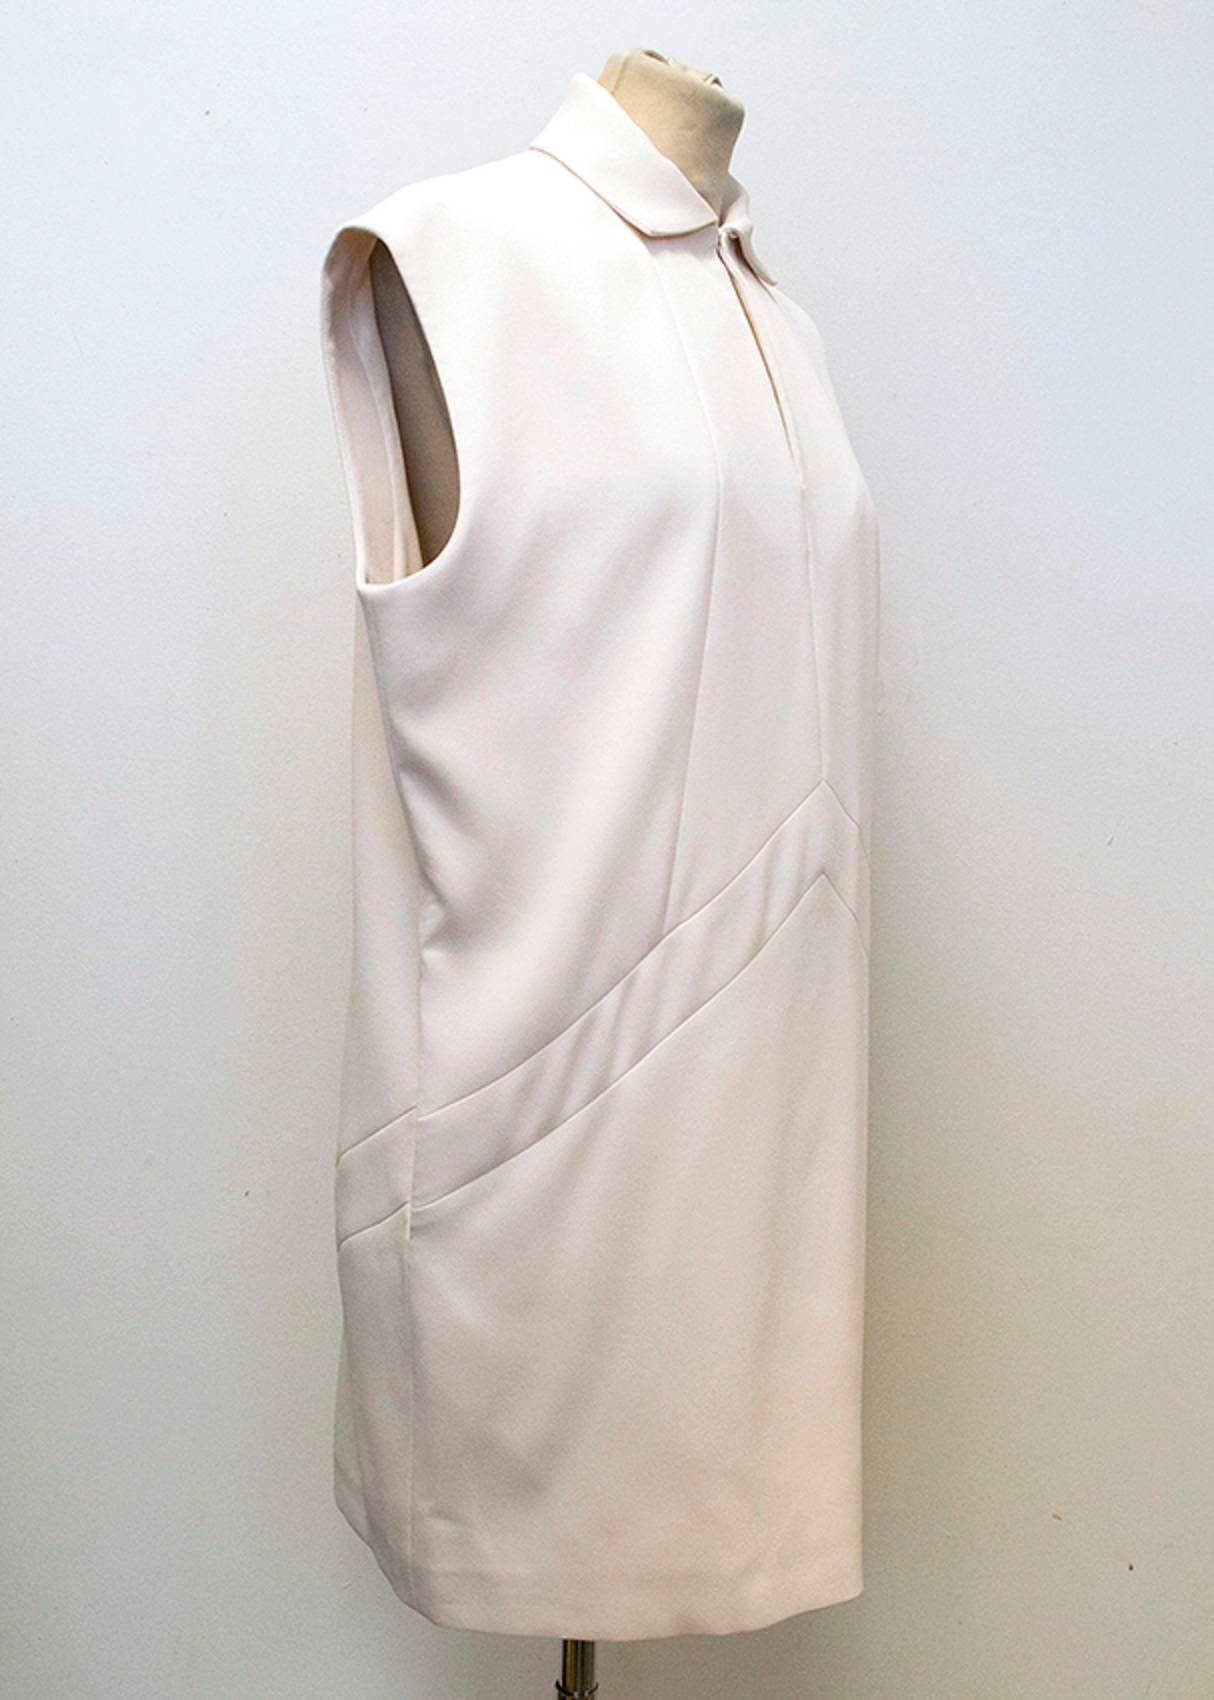 Balenciaga Cream Sleeveless Shirt Dress. Size 36. Perfect condition, never worn, without tags. 10/10. Made in France. Belongs to Caroline Stanbury from 'Ladies of London'.

FABRIC -	72% ACETATE 28% SILK

APPROX MEASUREMENTS: 
SHOULDERS:48CM